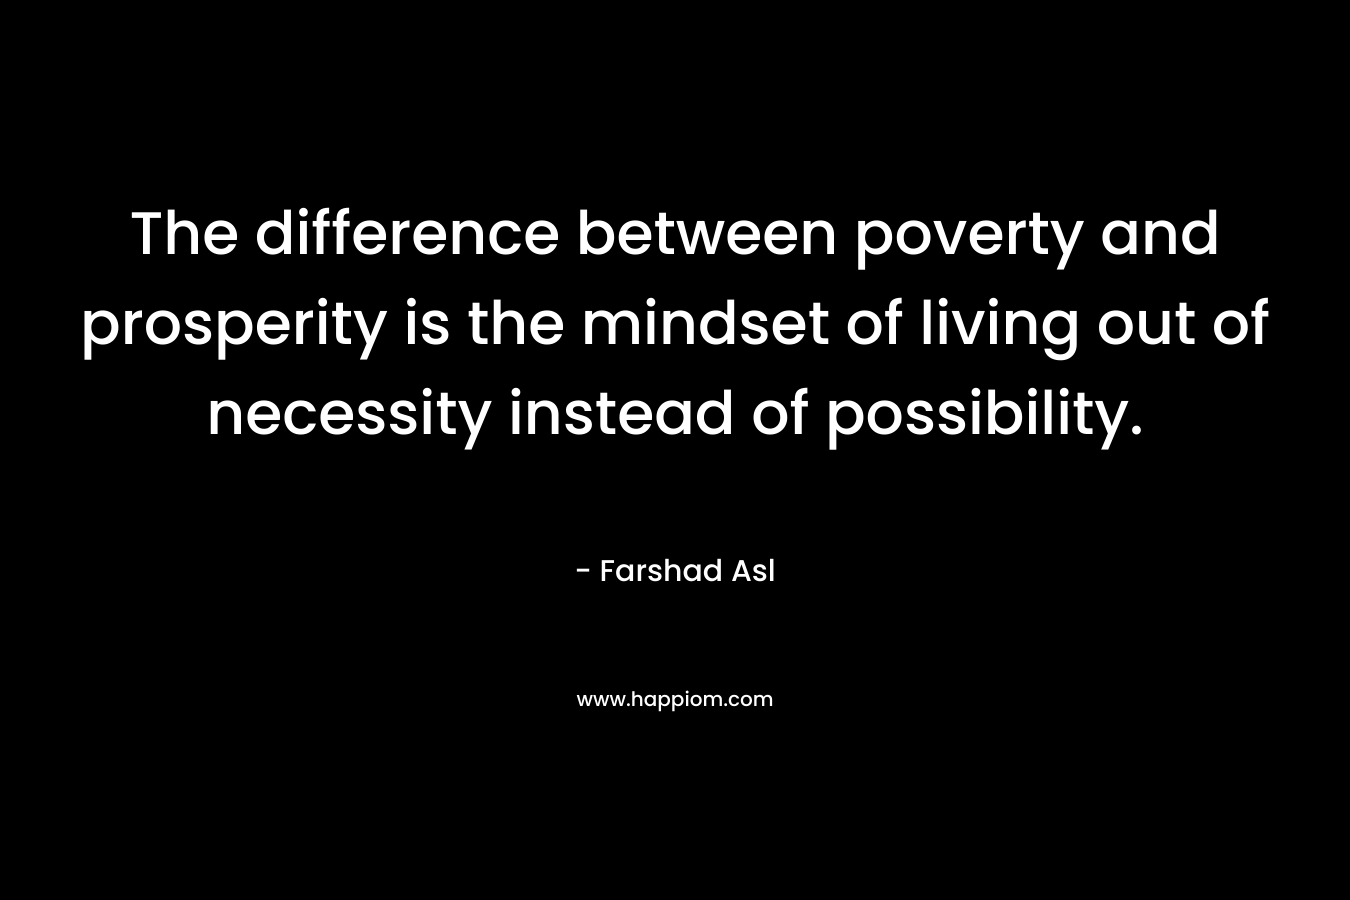 The difference between poverty and prosperity is the mindset of living out of necessity instead of possibility. – Farshad Asl